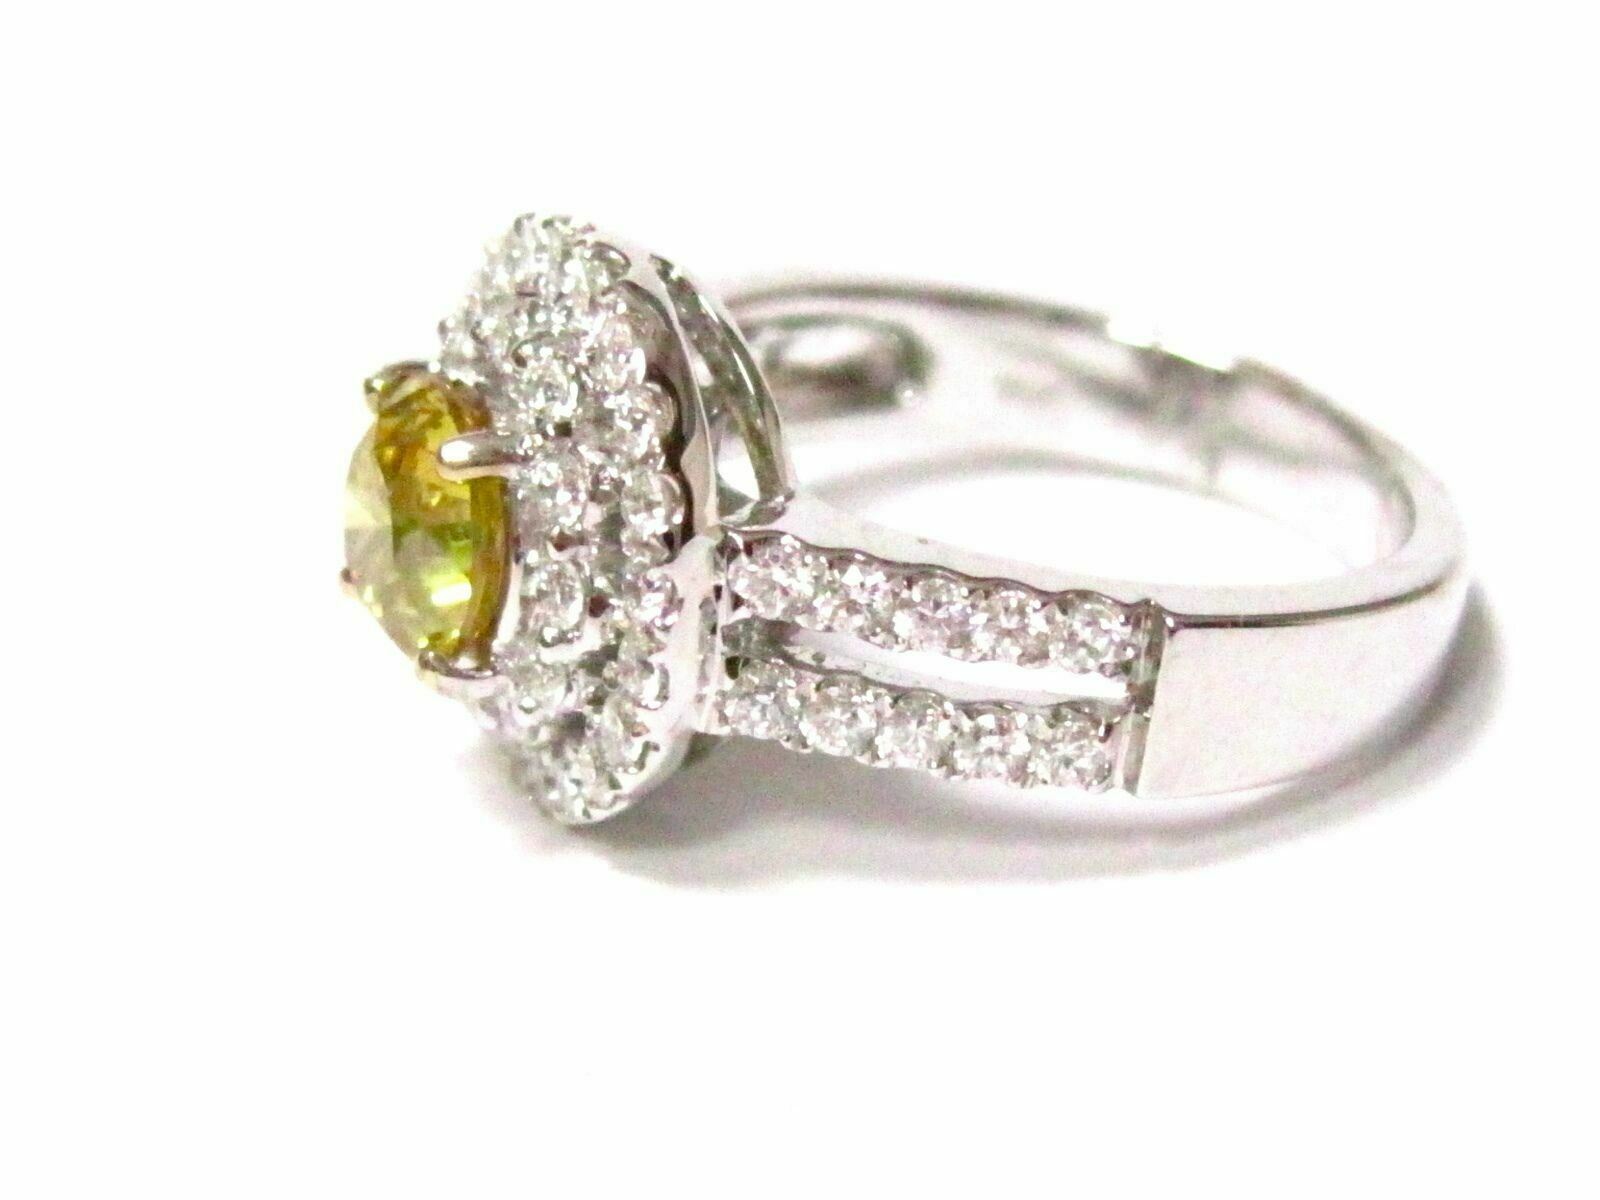 2.12 TCW Round Natural Fancy Yellow Diamond Engagement Ring Size 6.5 18k Gold